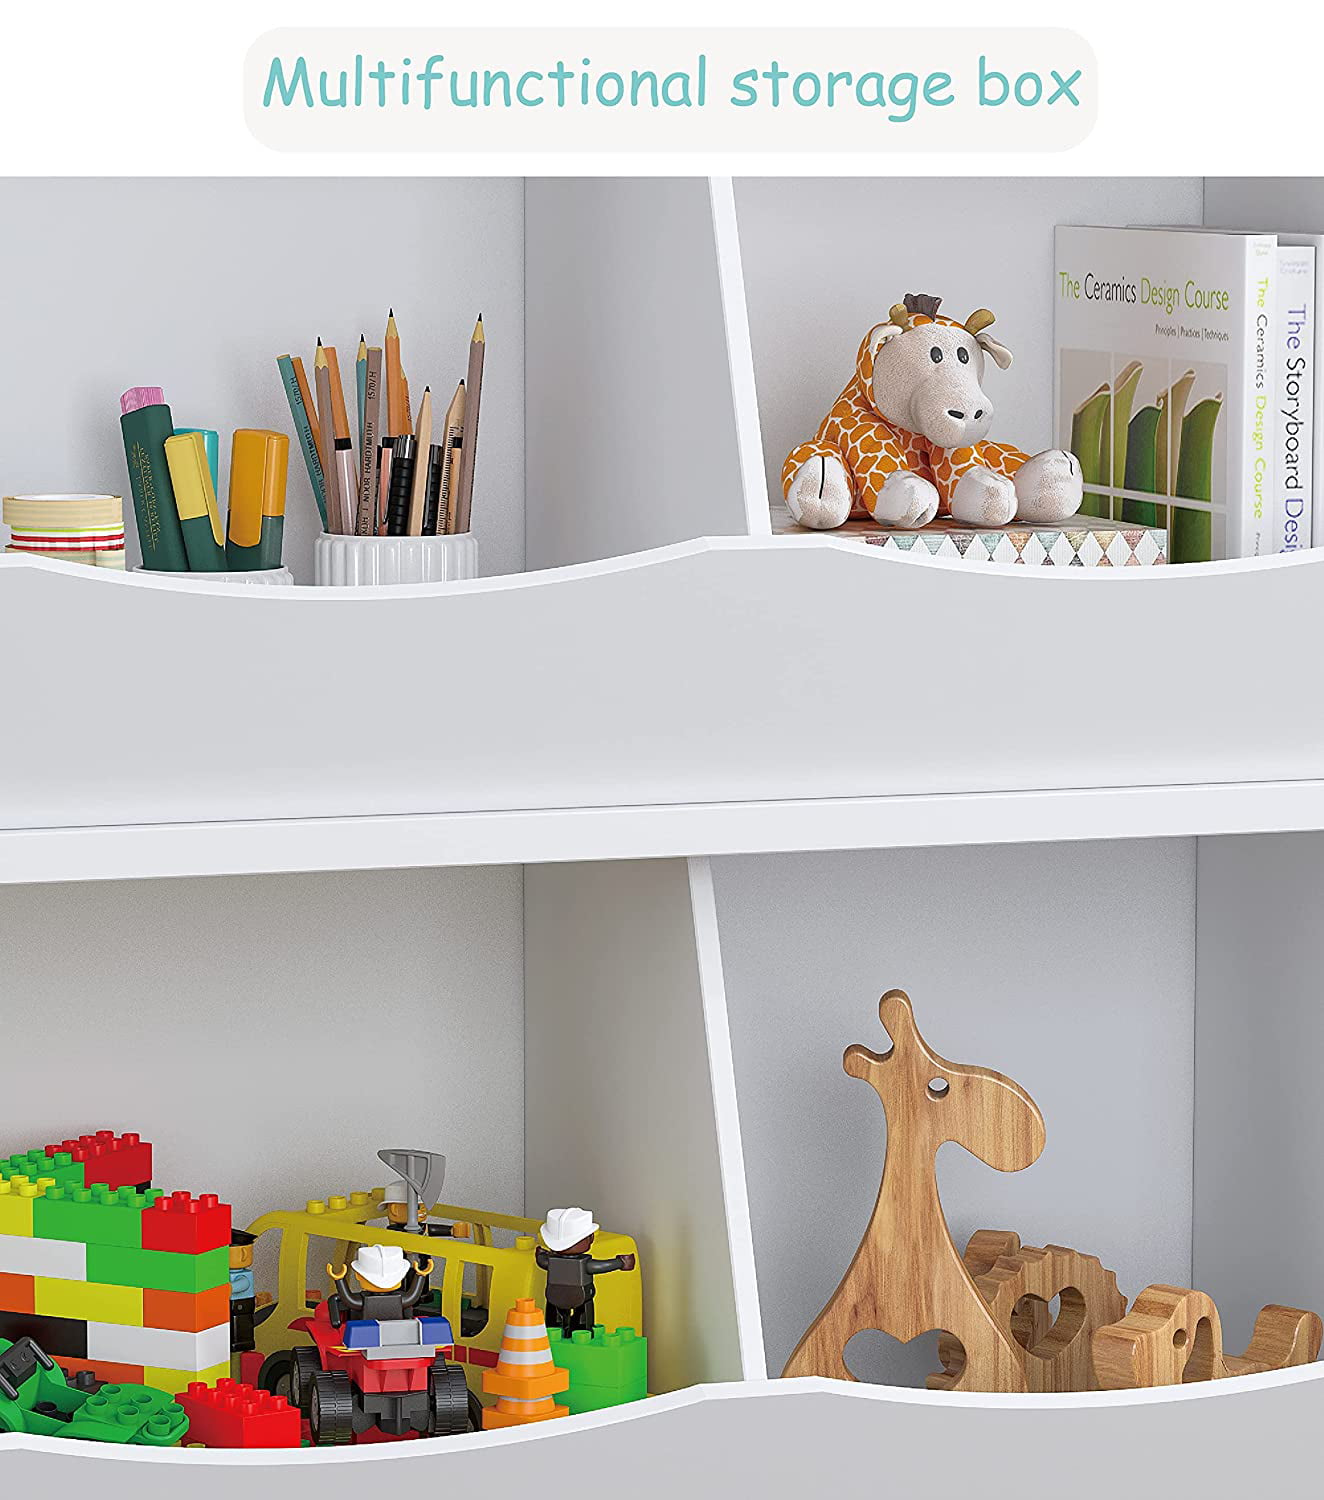 WFX Utility™ Manufactured Wood Toy Organizer & Reviews